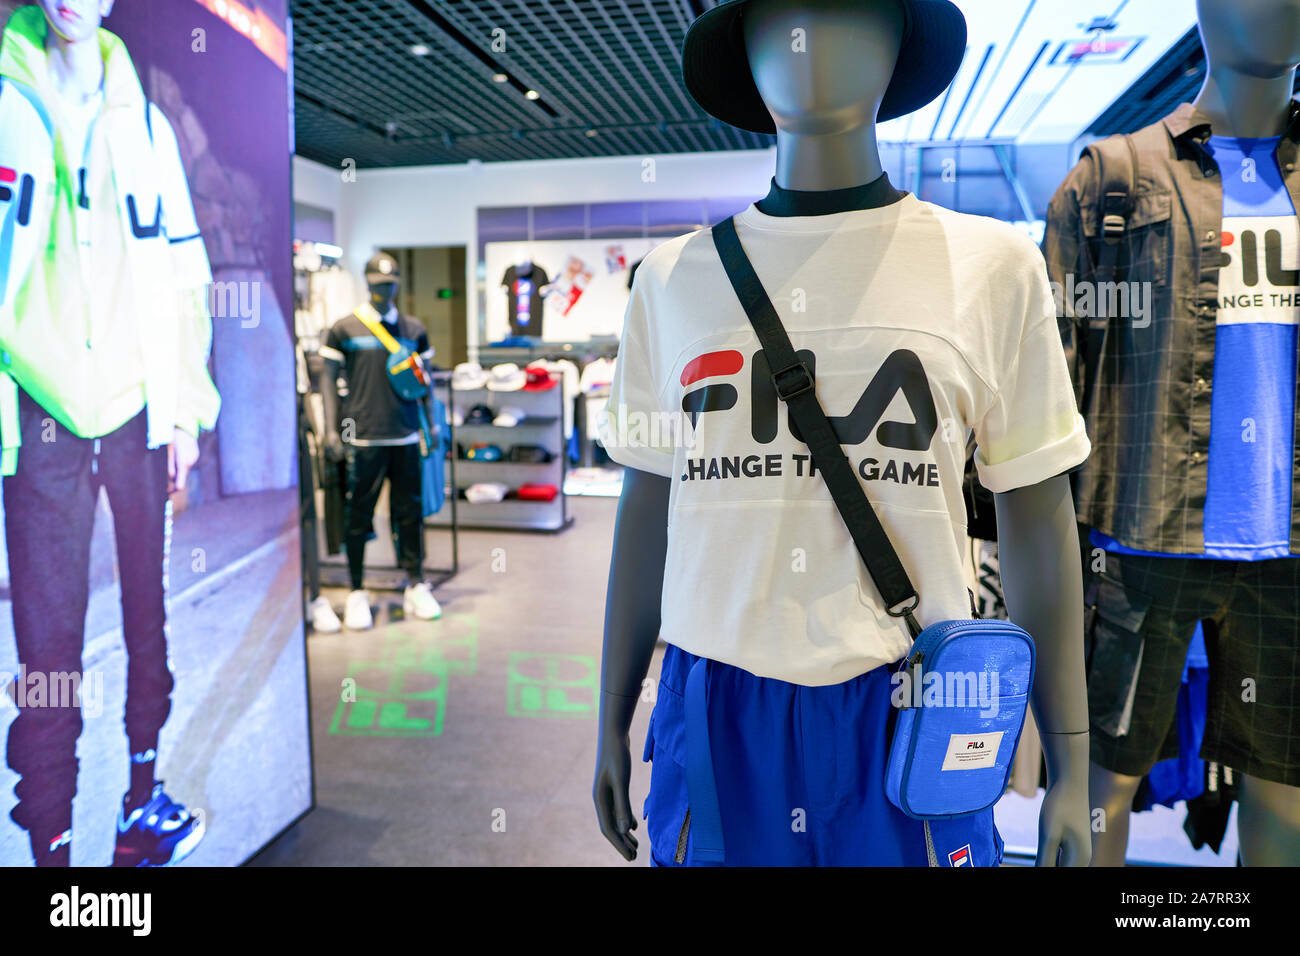 SHENZHEN, CHINA - CIRCA APRIL, 2019: clothes on display at Fila store in  Shenzhen. Fila is an Italian sporting goods brand and company Stock Photo -  Alamy